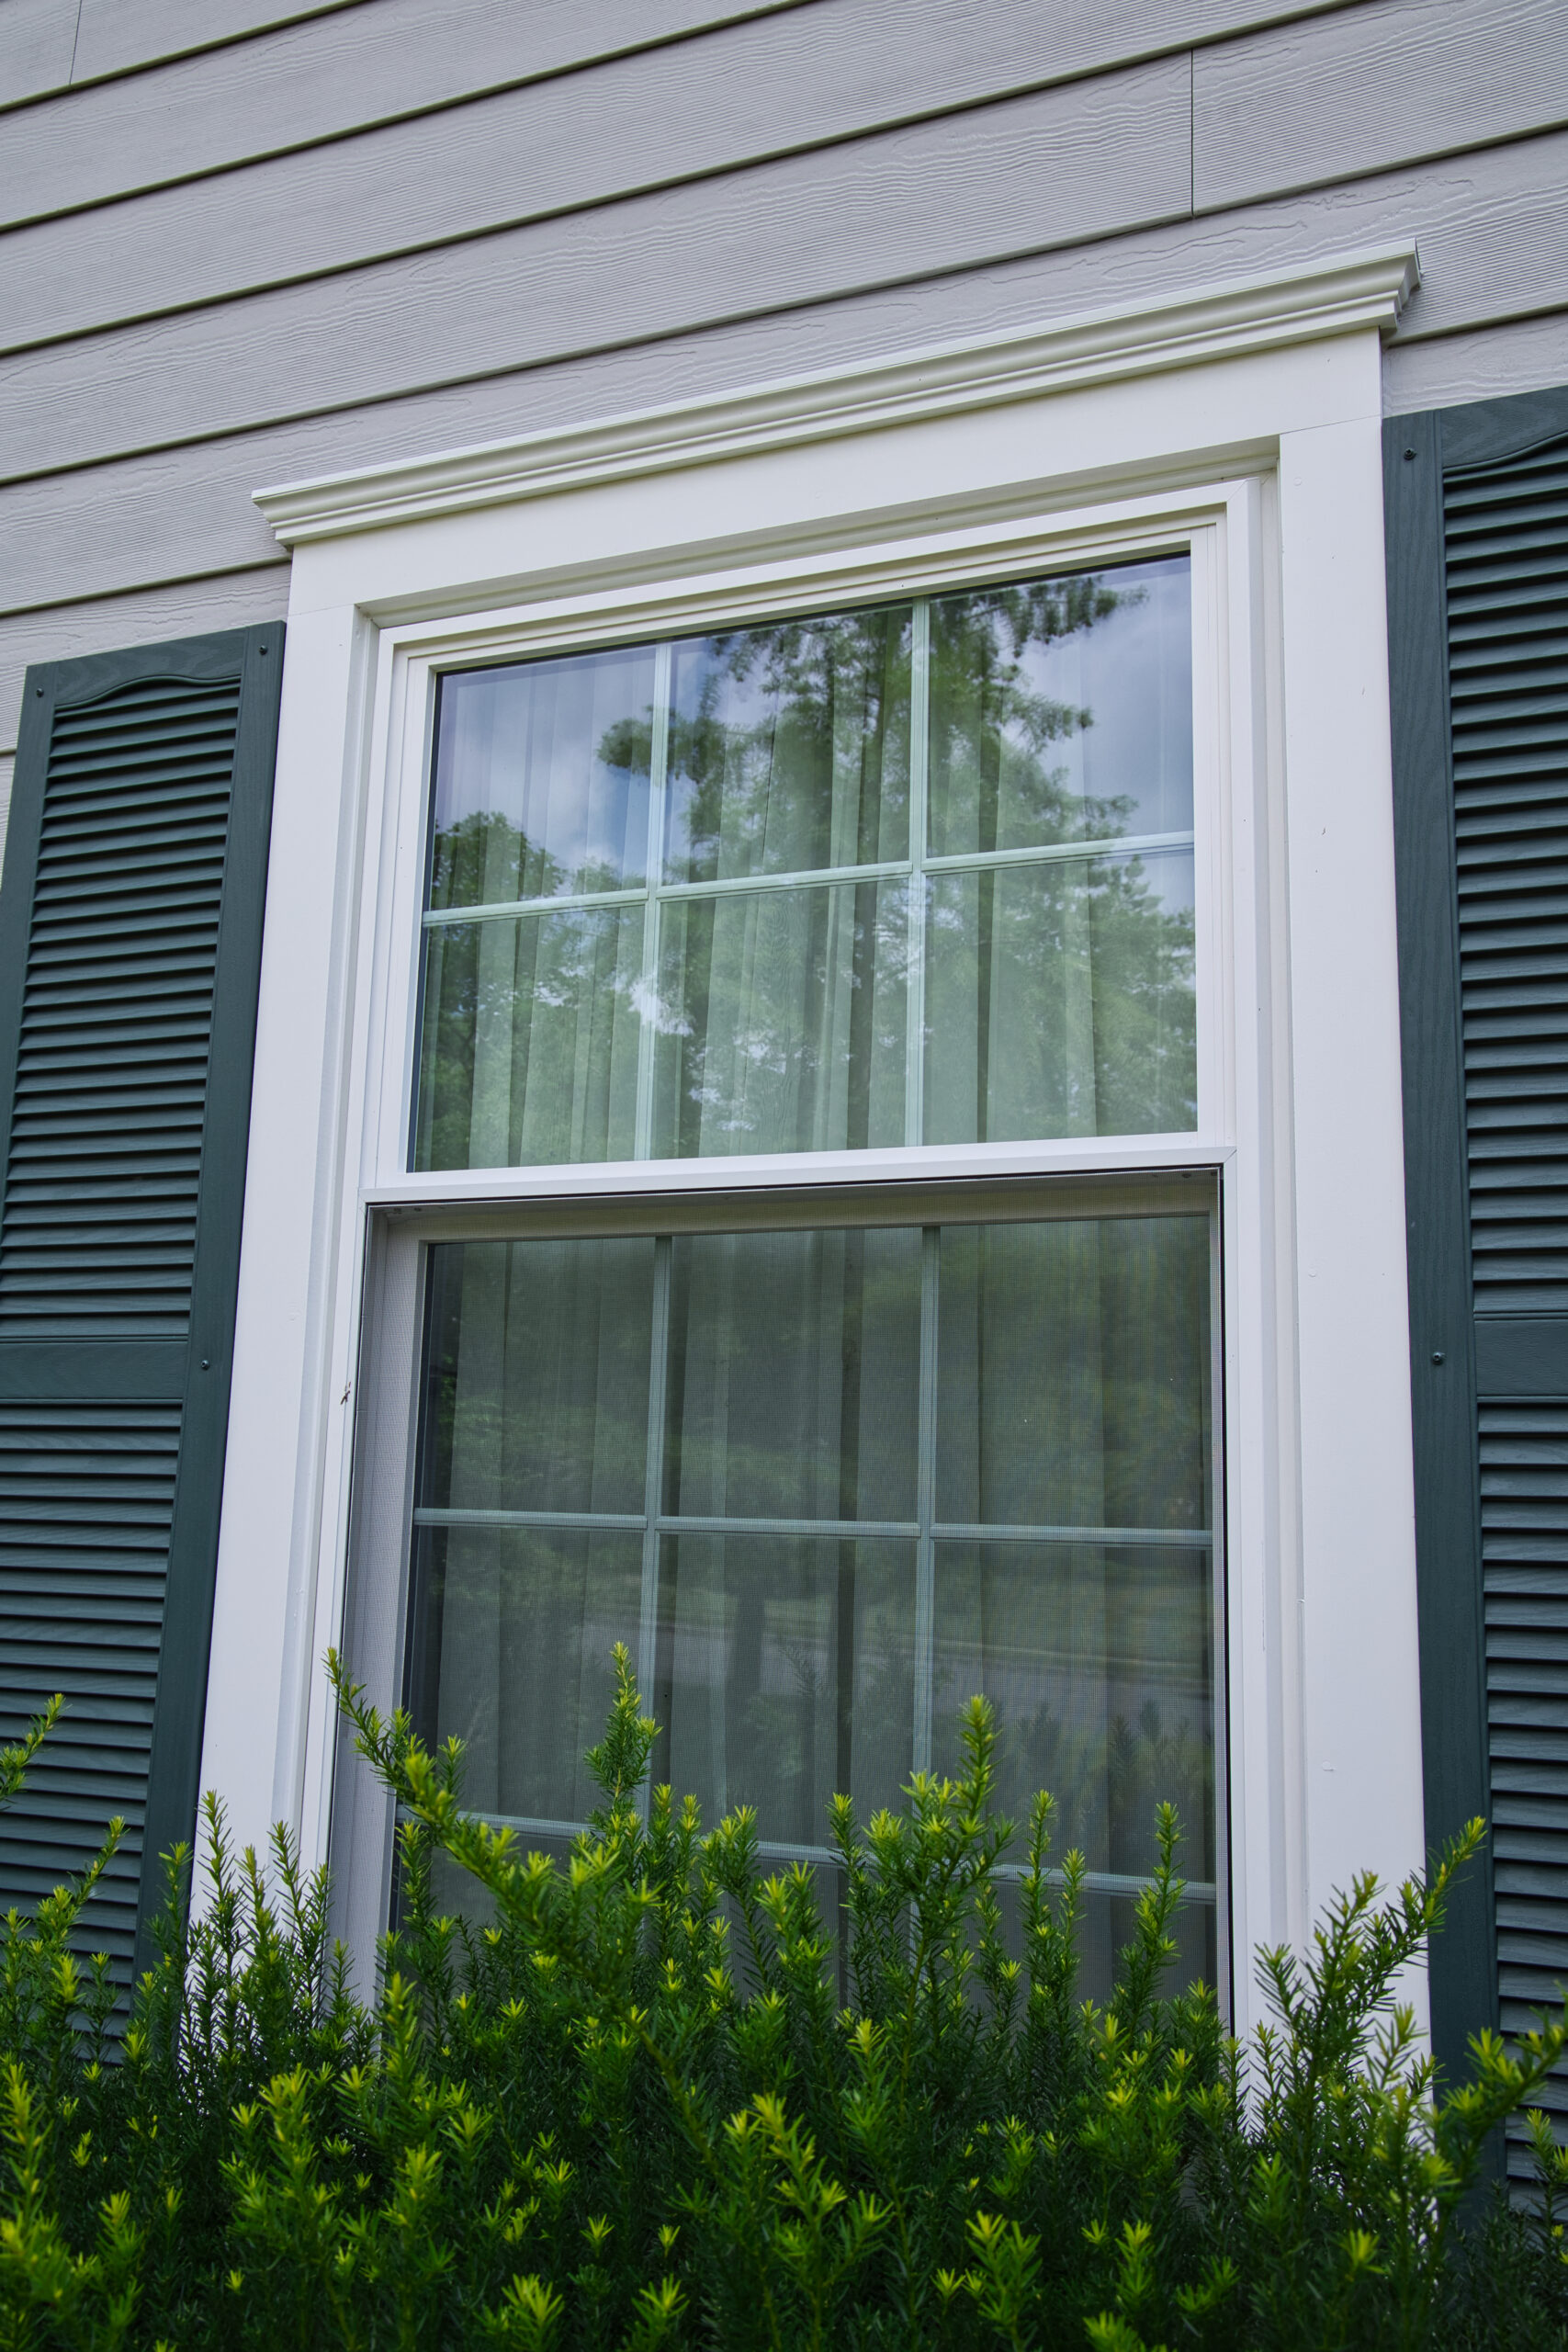 A window with green shutters.